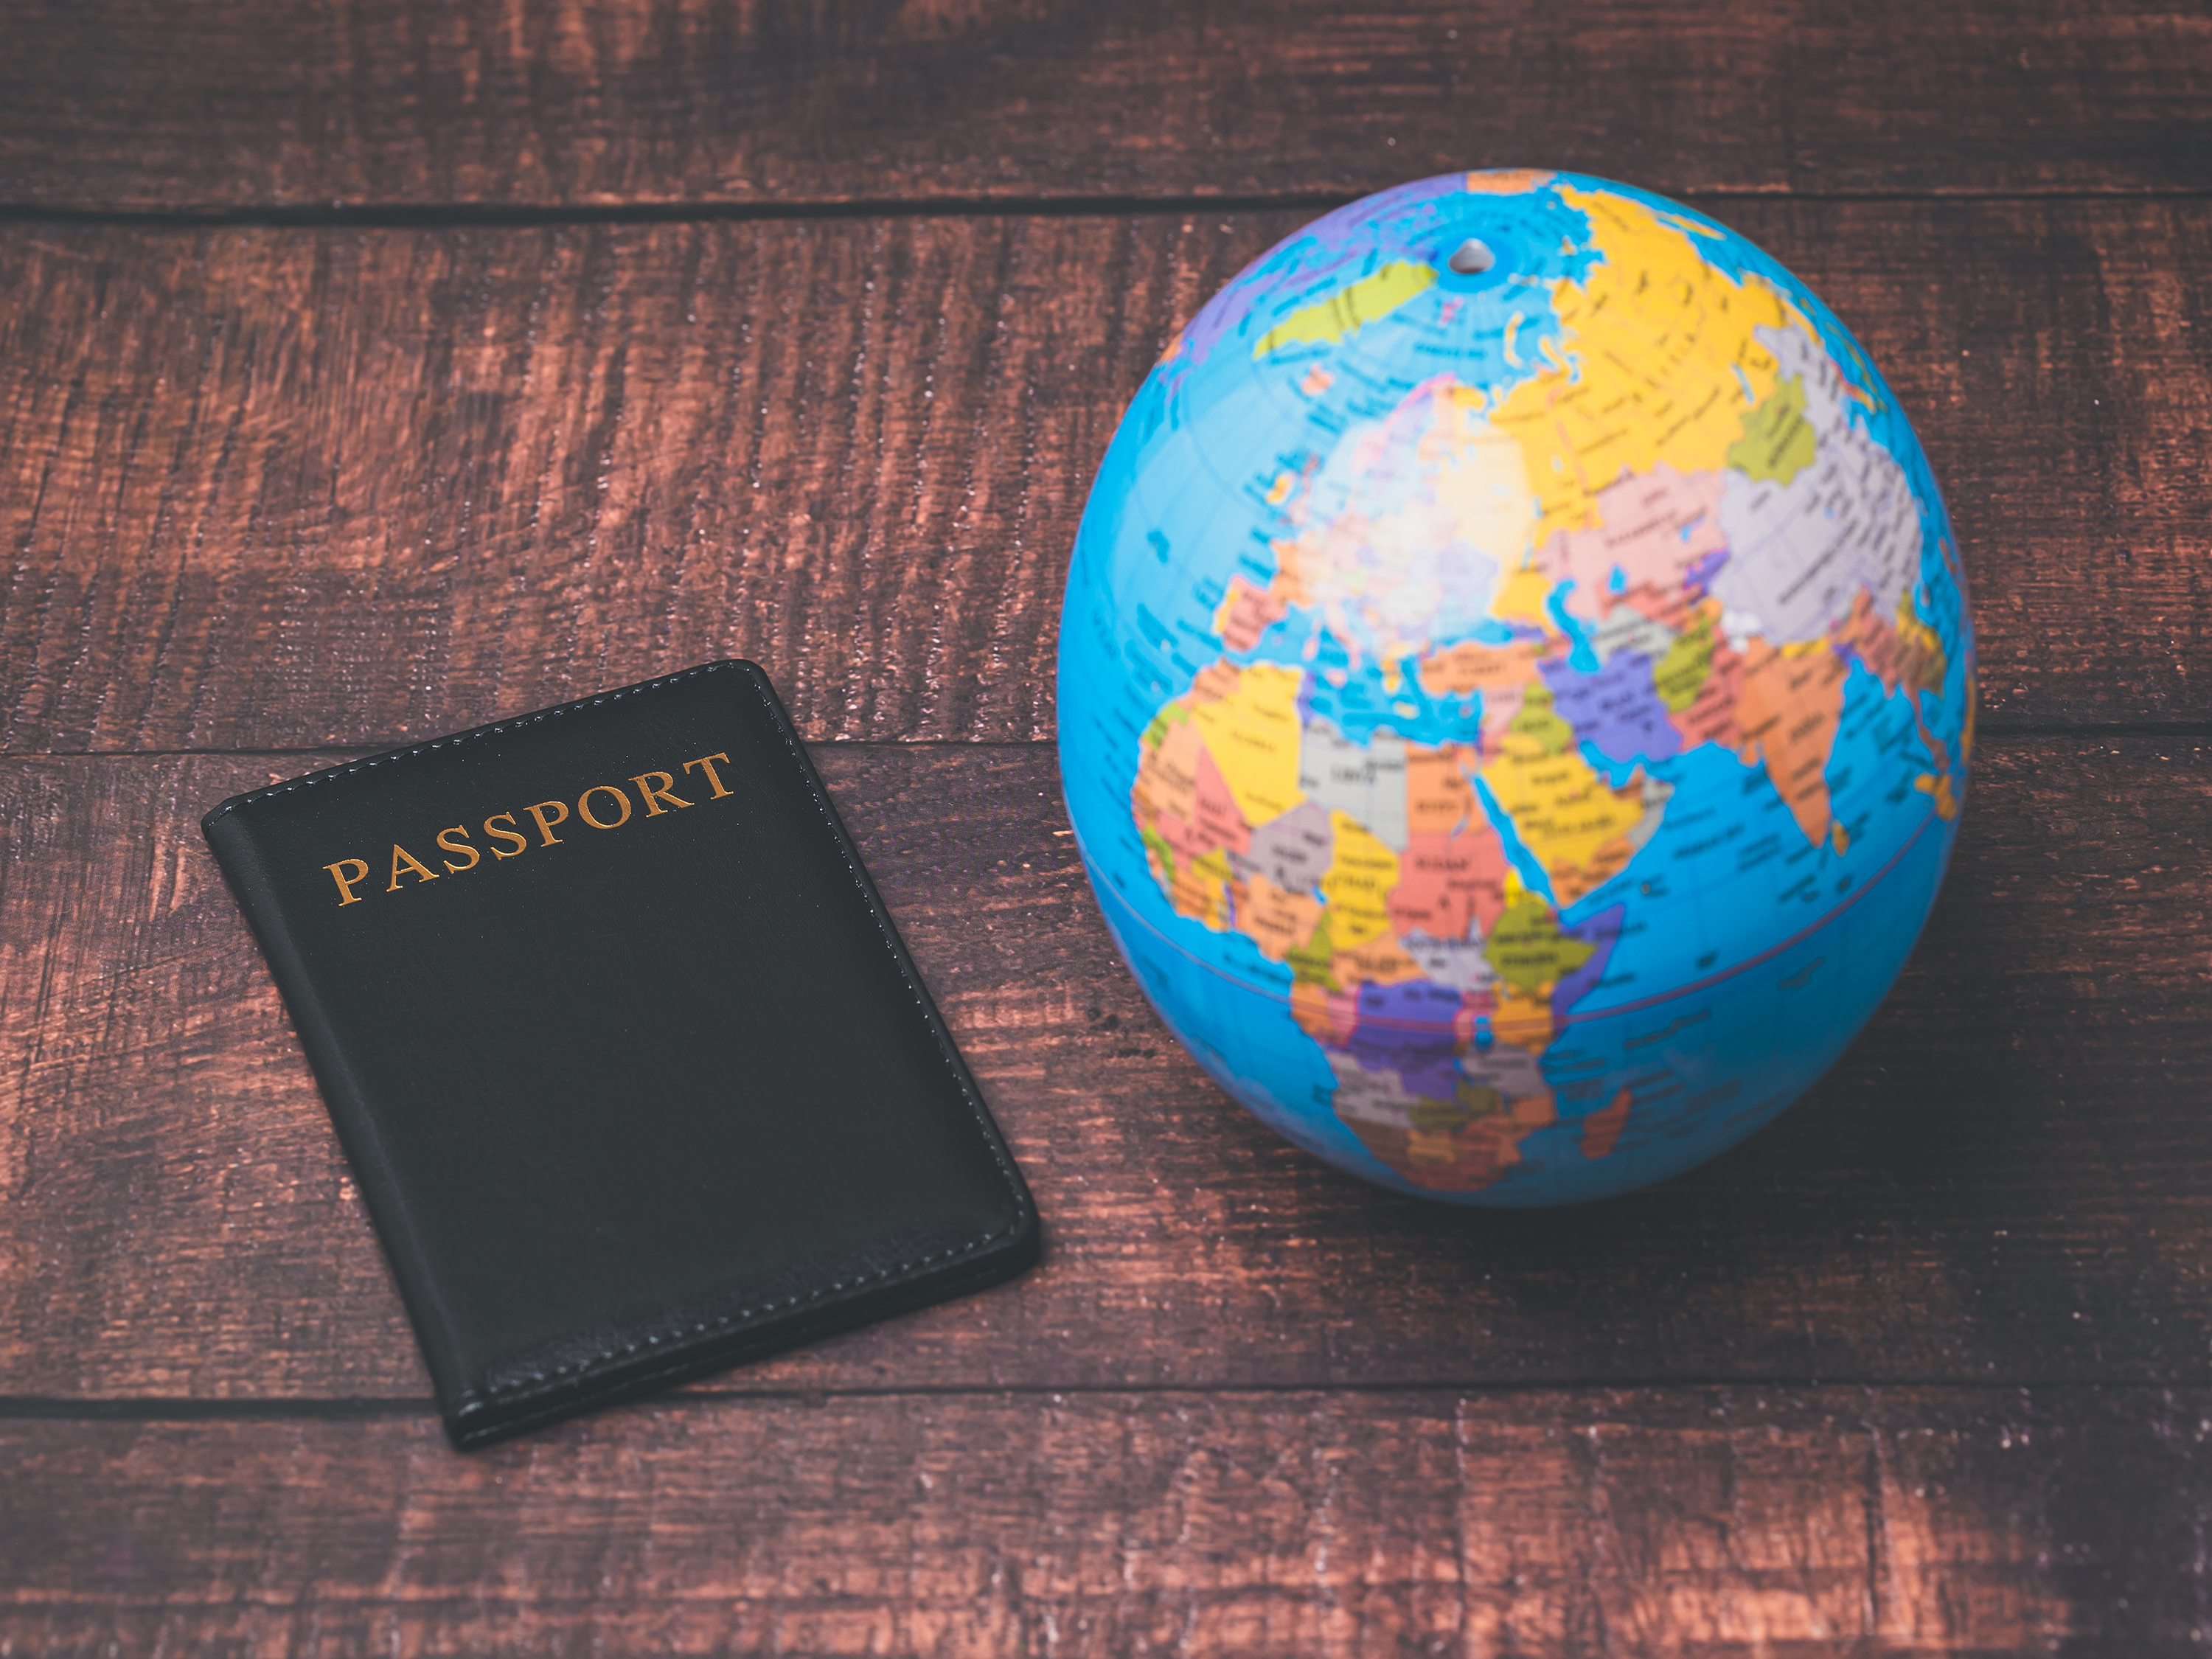 Passport next to a globe on a wooden surface